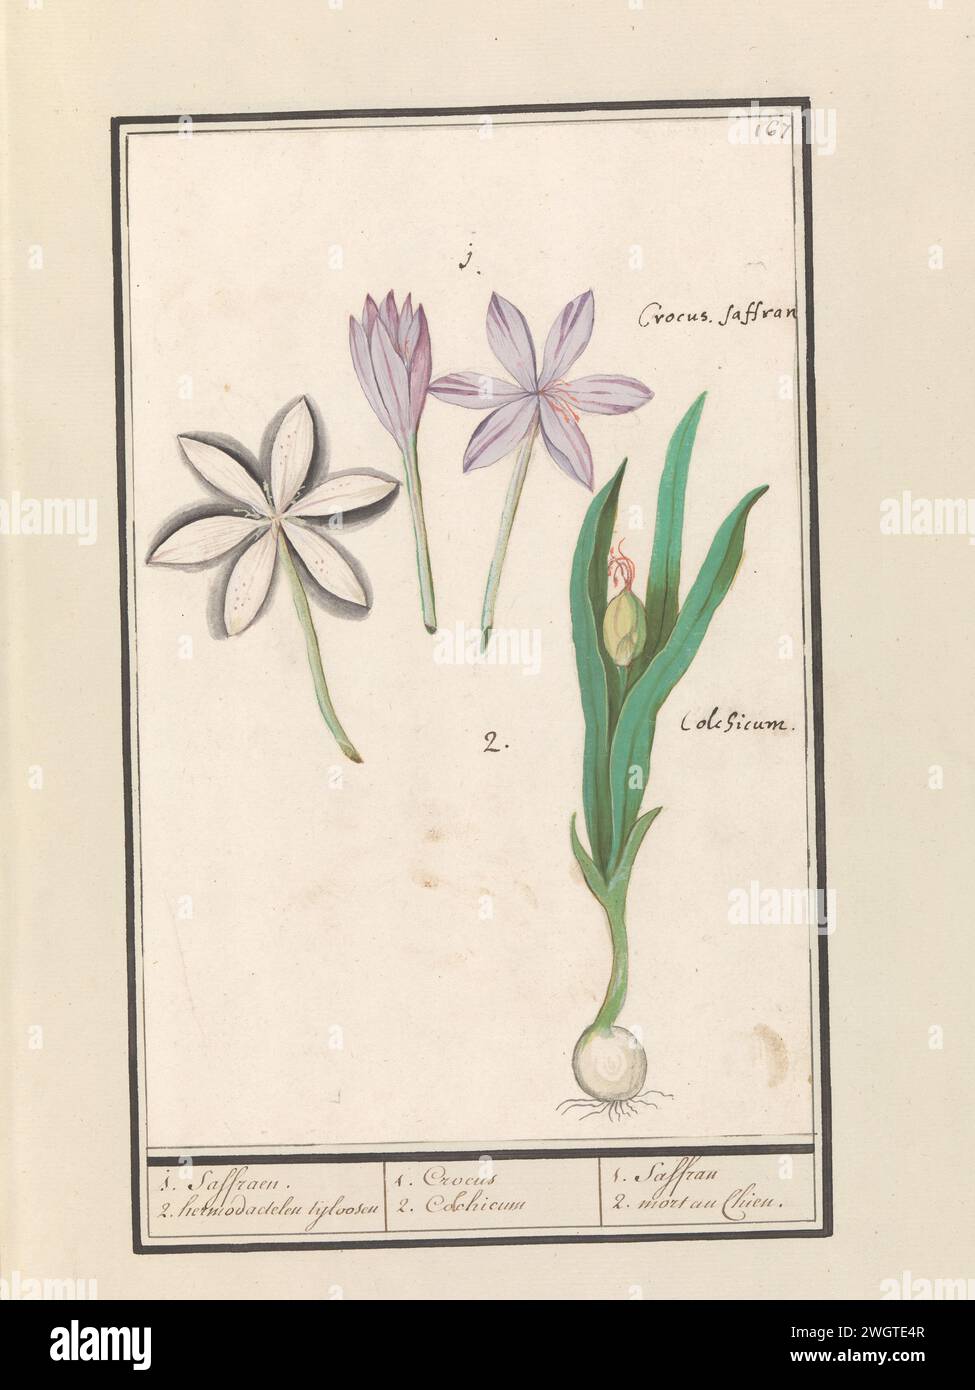 Herfstijloos (Colchicum autumn), Anselm Bootius of Boodt, 1596 - 1610 drawing Autumn -free. Three loose flowers and a plant with sphere, leaves and button. Numbered at the top right: 167. The Latin name for the flowers. Part of the second album with drawings of flowers and plants. Ninth of twelve albums with drawings of animals, birds and plants known around 1600, made commissioned by Emperor Rudolf II. With explanation in Dutch, Latin and French. draughtsman: Praagdraughtsman: Delft paper. watercolor (paint). deck paint. ink. chalk brush / pen flowers: autumn crocus Stock Photo